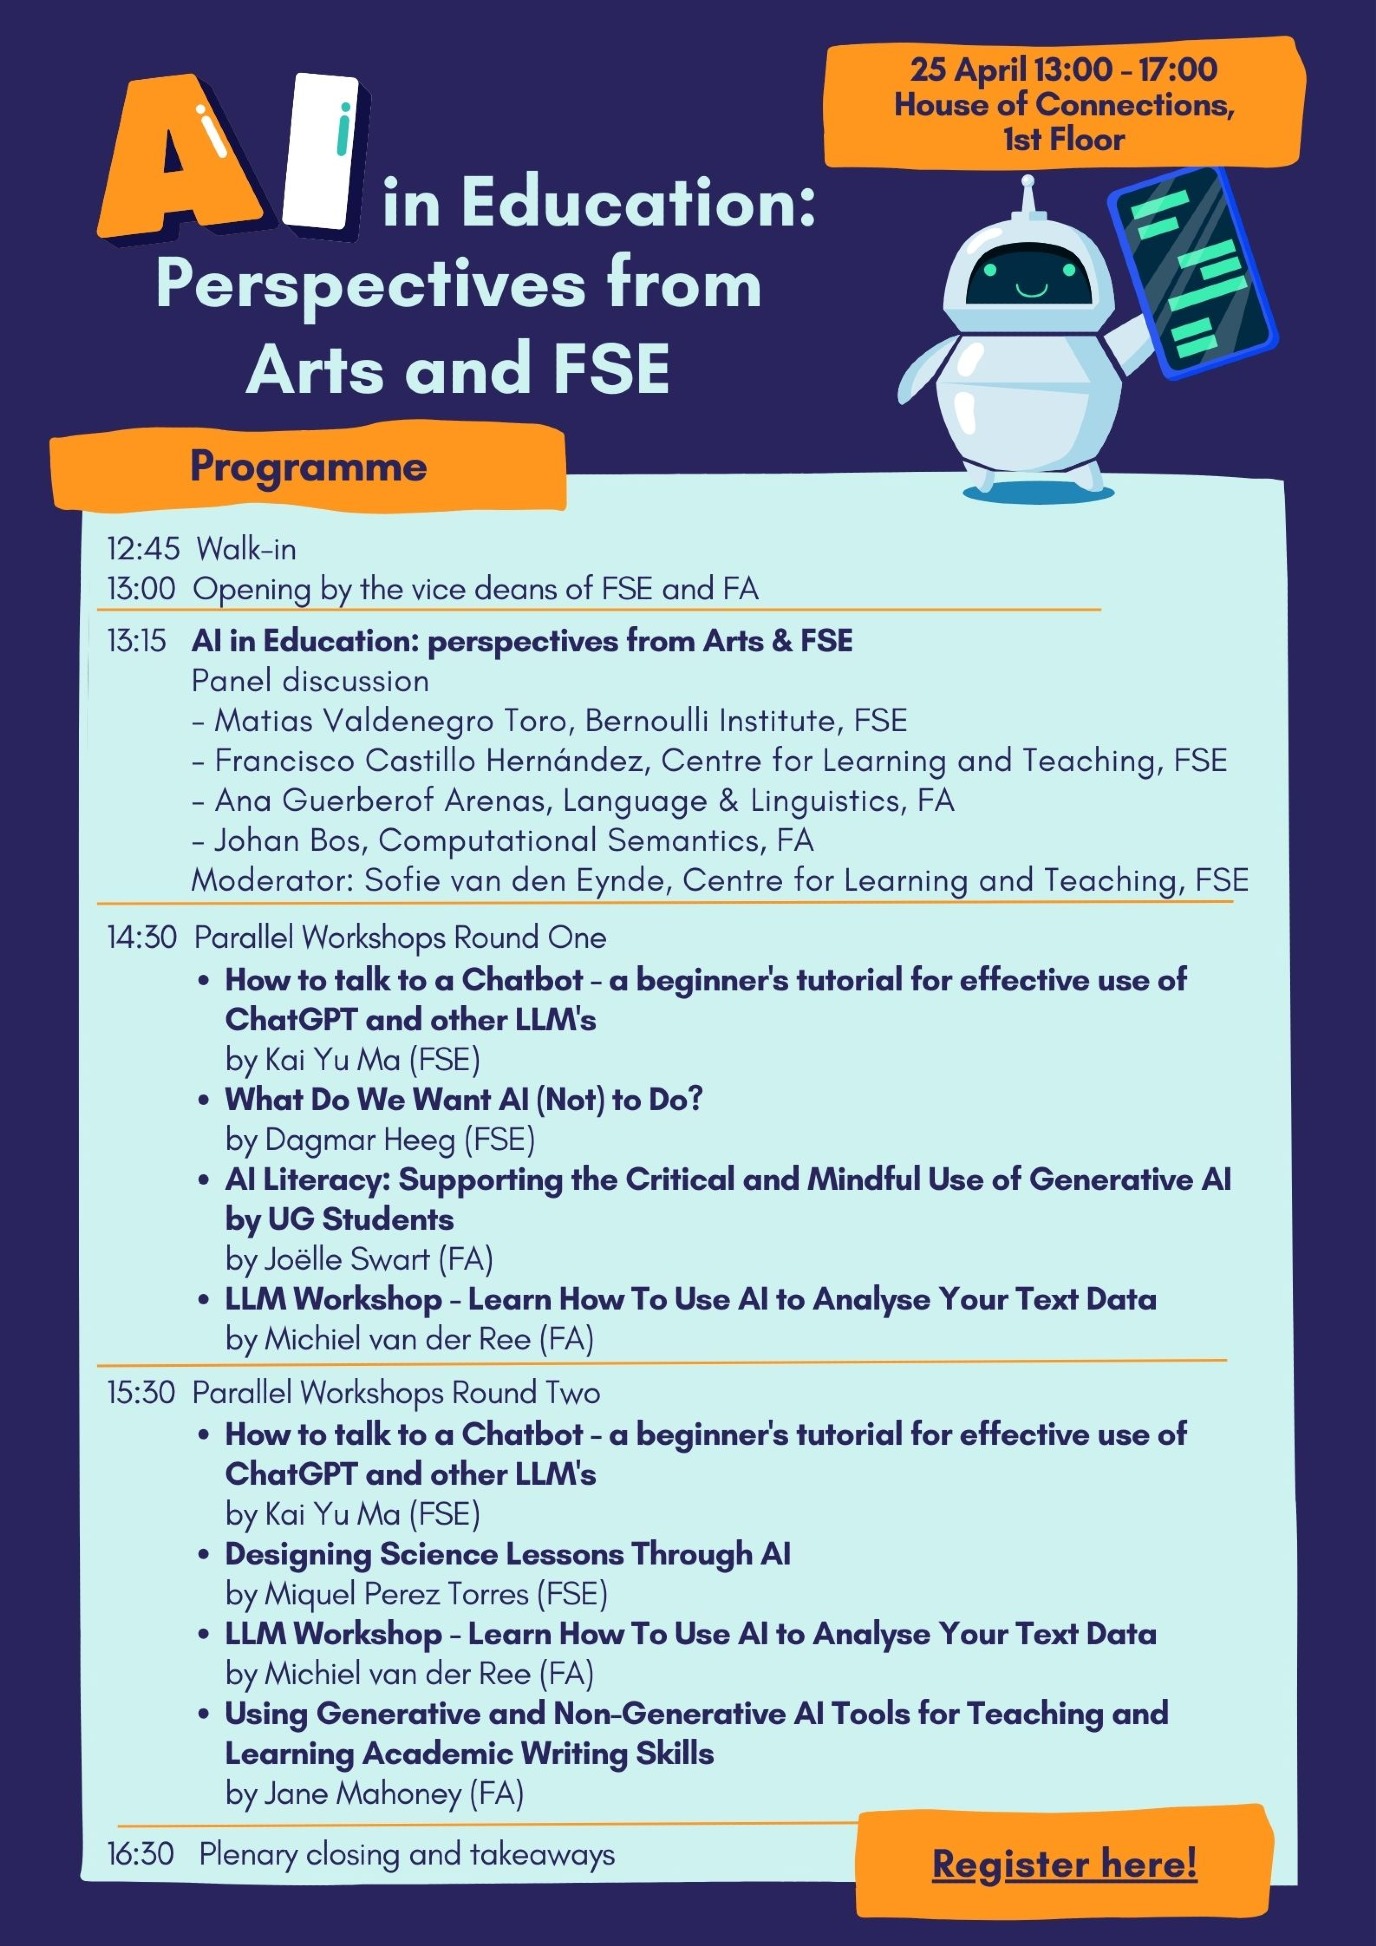 Programme of event